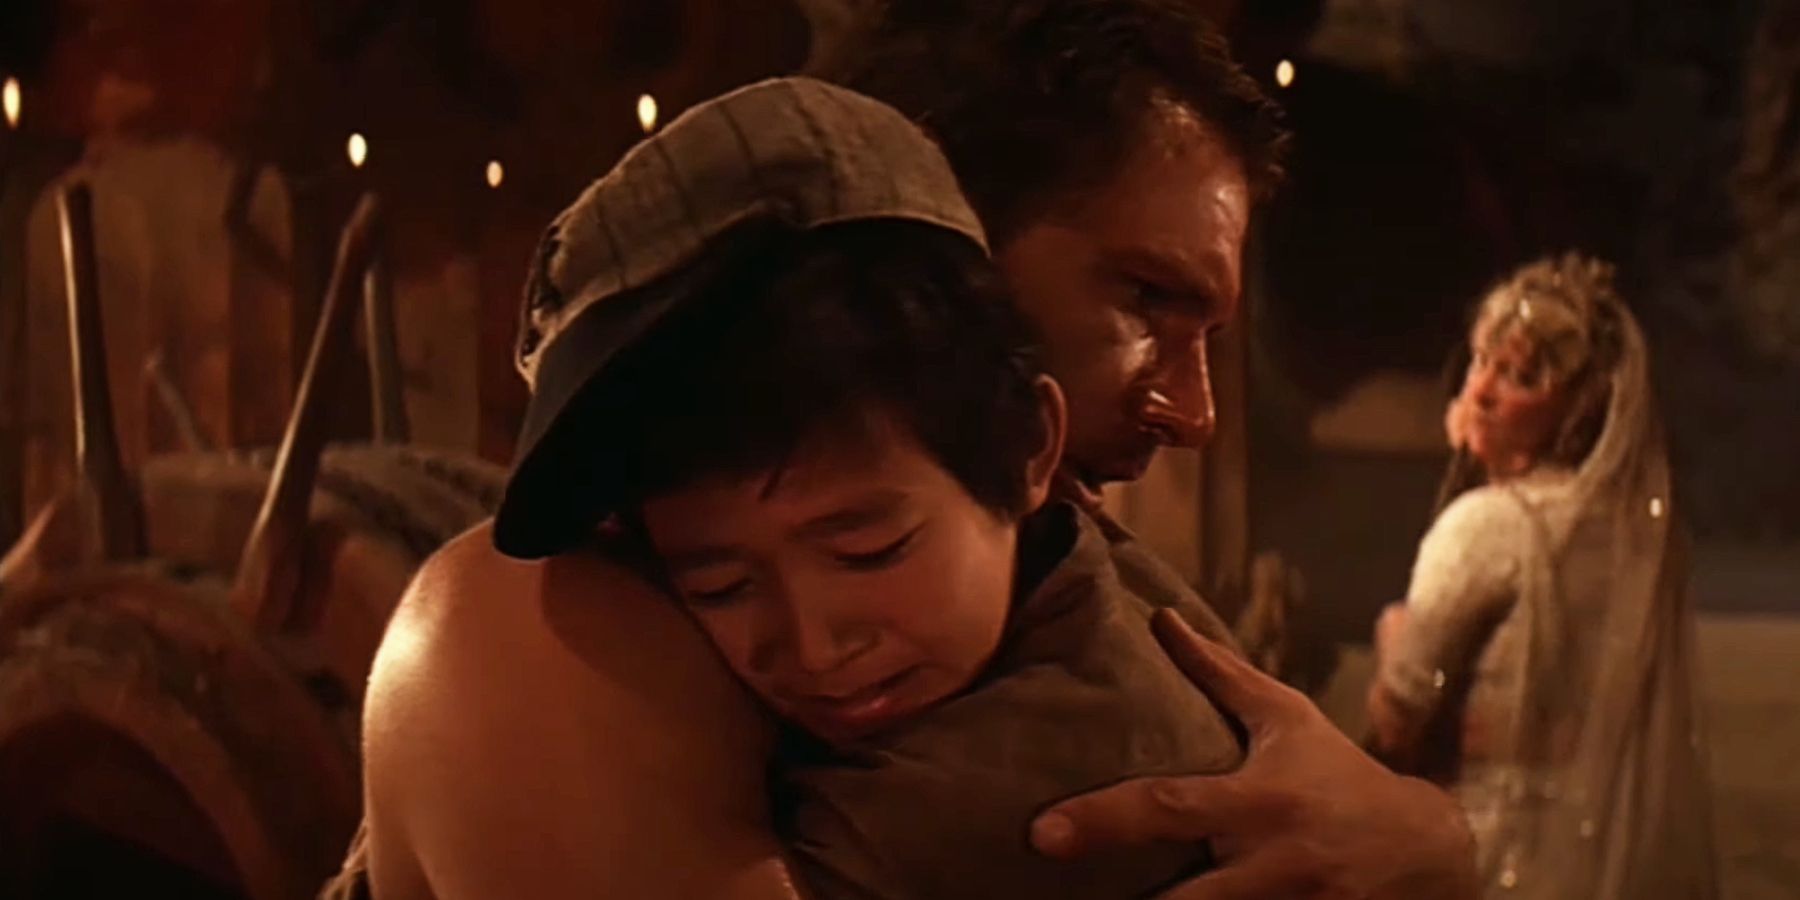  Ke Huy Quan as Short Round and Harrison Ford as Indy hug each other in Indiana Jones and the Temple of Doom